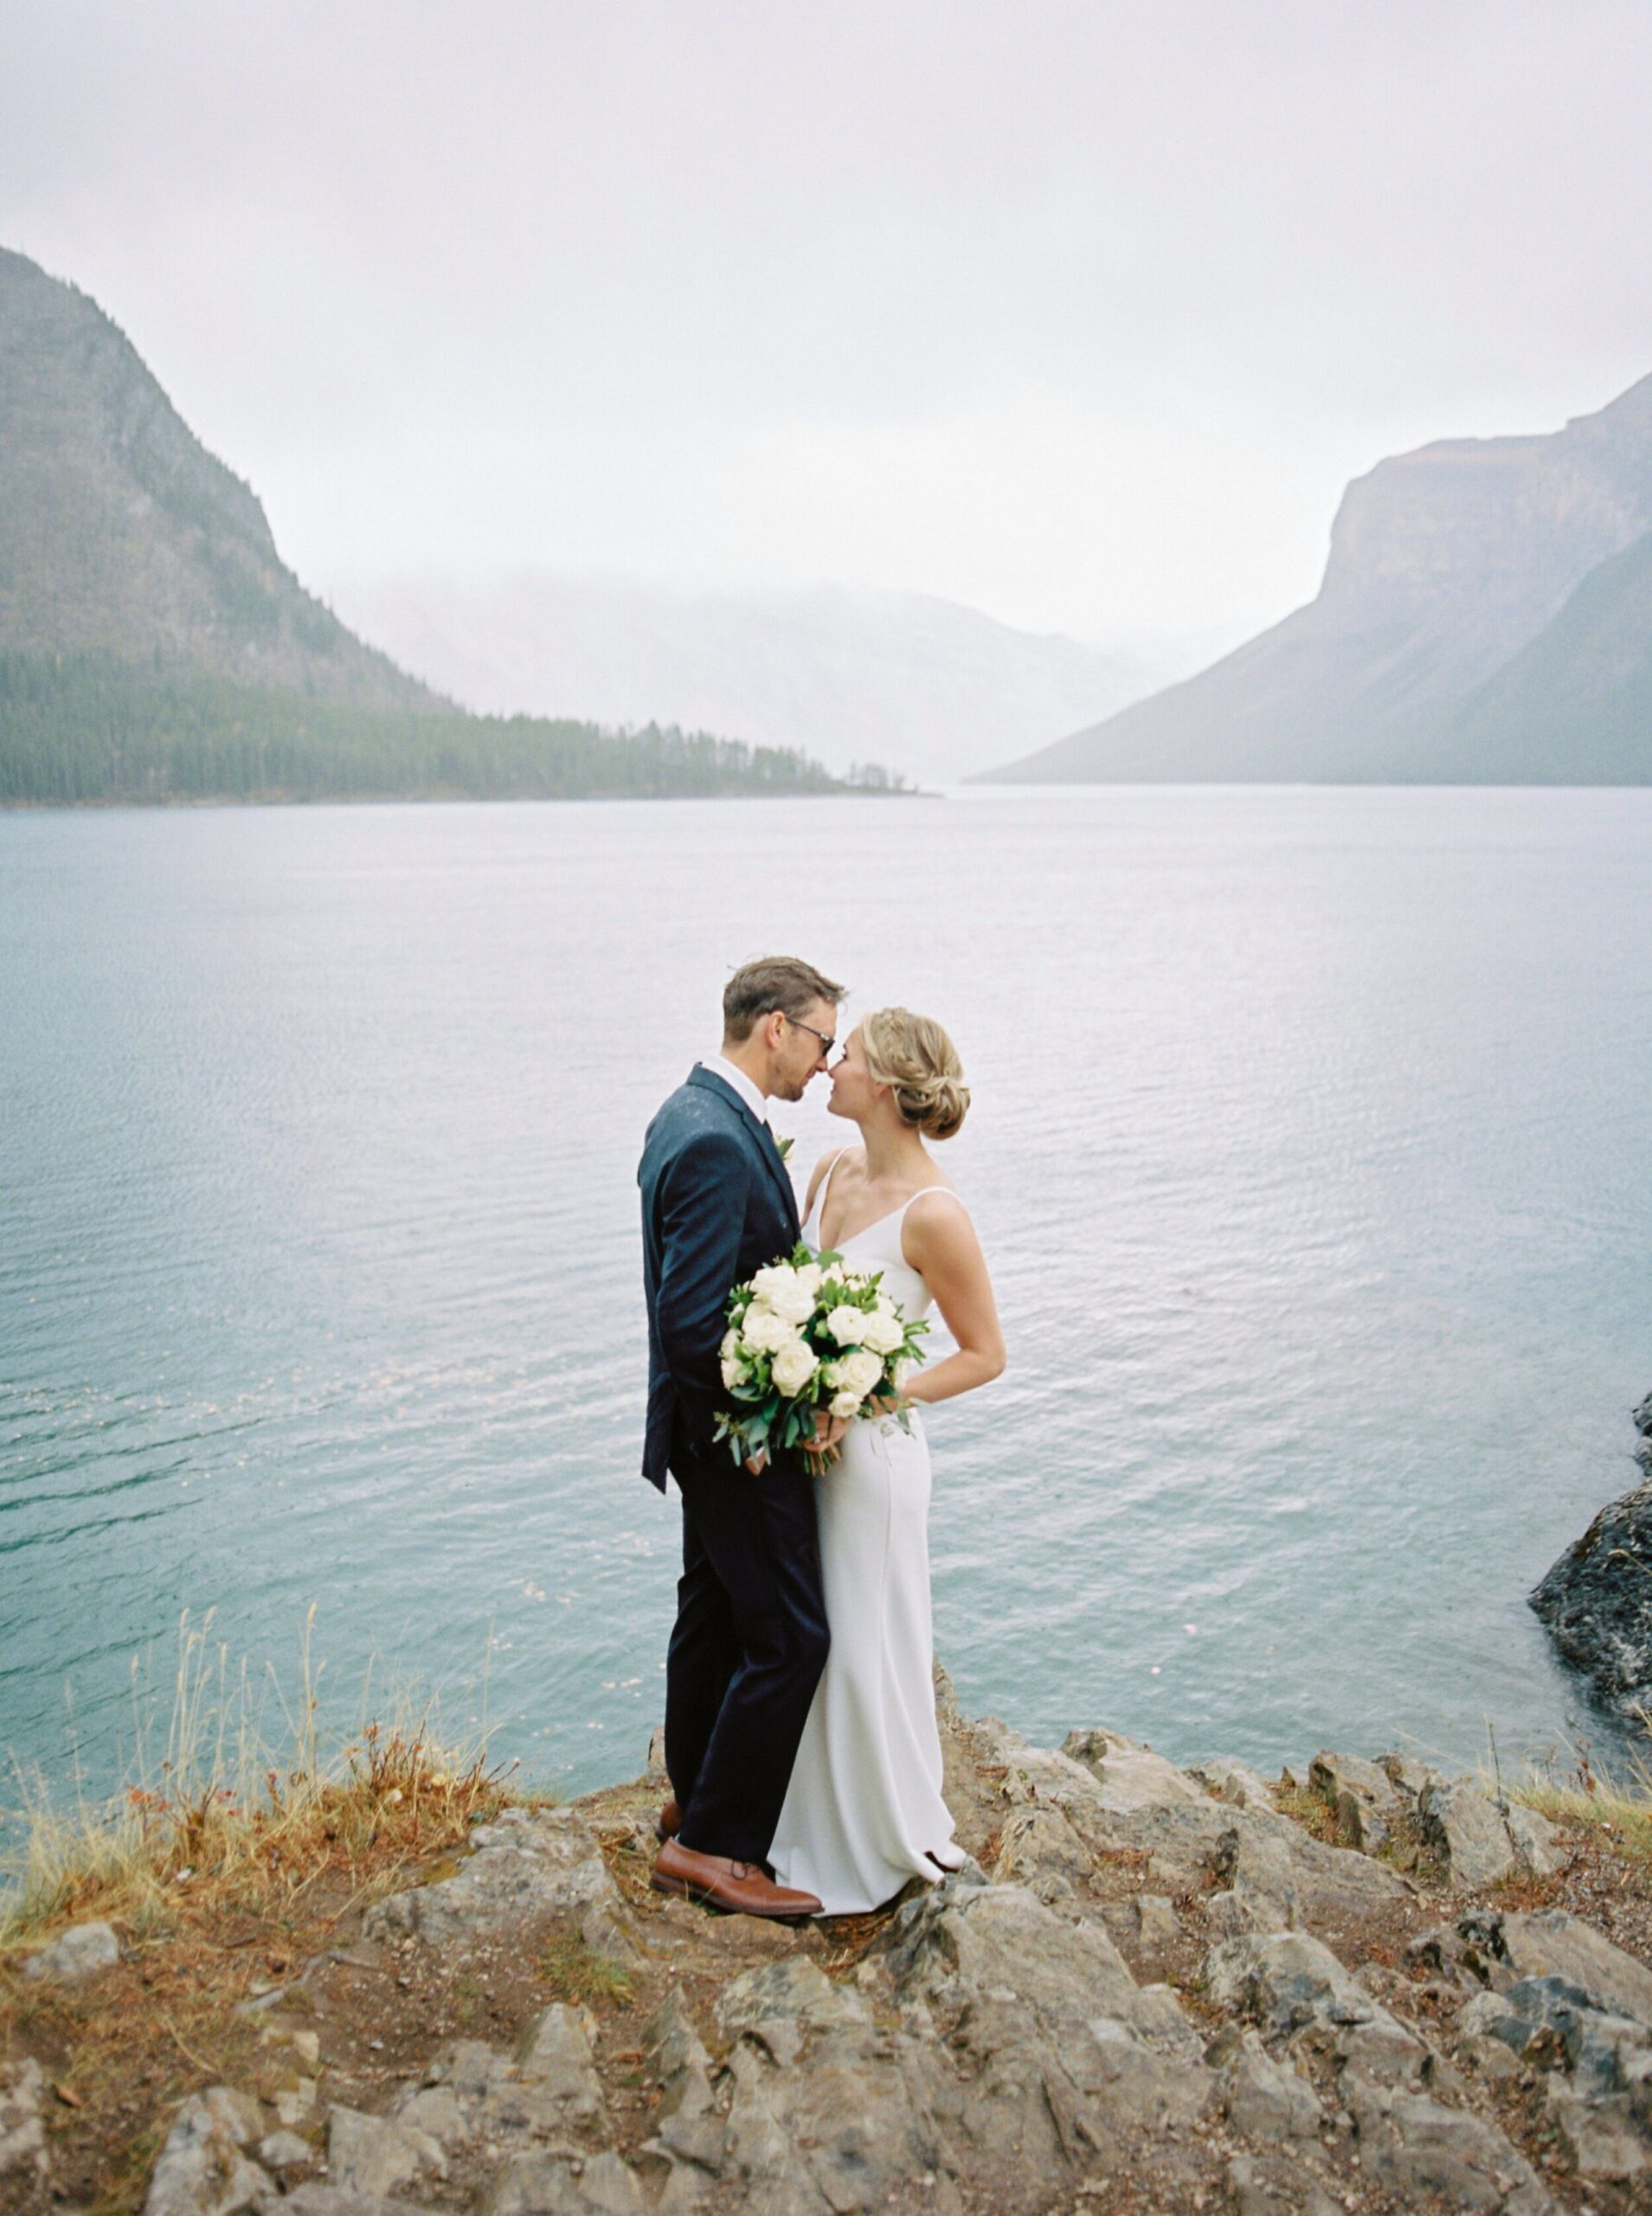  Bride and groom portraits in the pouring rain | Banff Springs Hotel Vow Renewal Wedding Photographers 